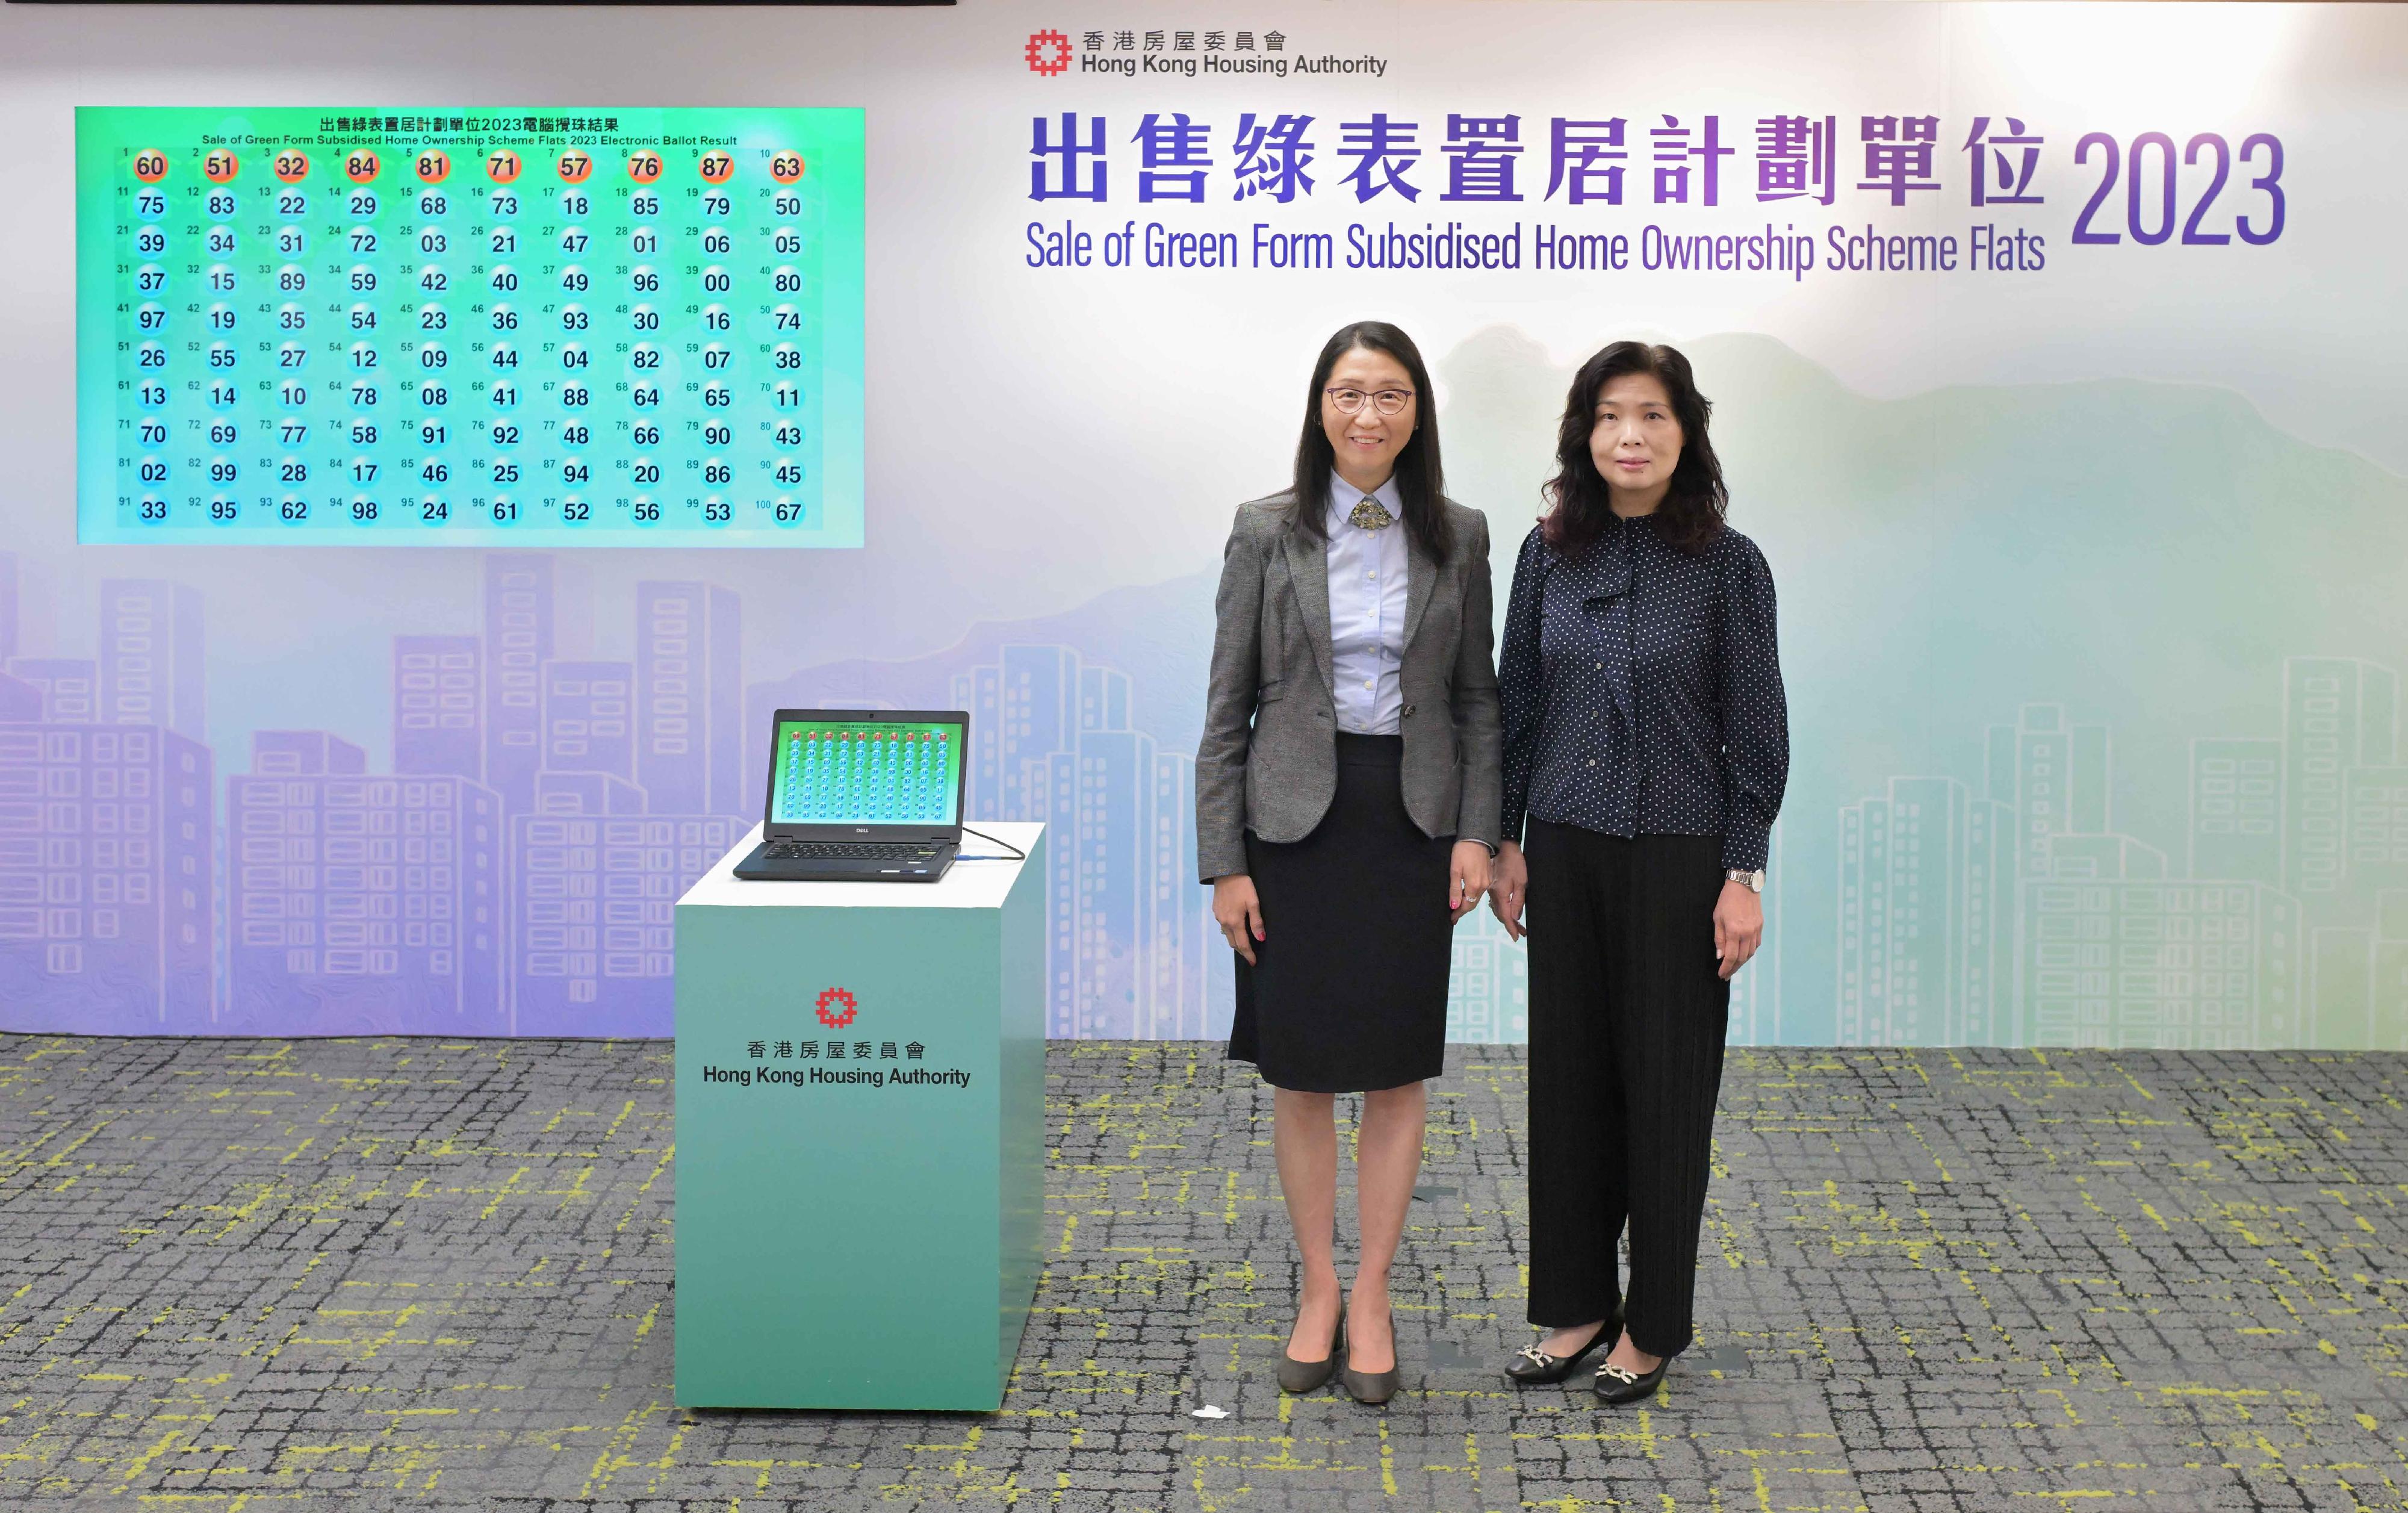 The Chairman of the Subsidised Housing Committee of the Hong Kong Housing Authority, Ms Cleresa Wong (left), accompanied by the Assistant Director of Housing (Housing Subsidies), Ms Carol Kong, officiated at the electronic ballot drawing ceremony today (June 6) for the Sale of Green Form Subsidised Home Ownership Scheme Flats 2023. The ballot drawing was to determine the priority sequence based on the last two digits of the application numbers.